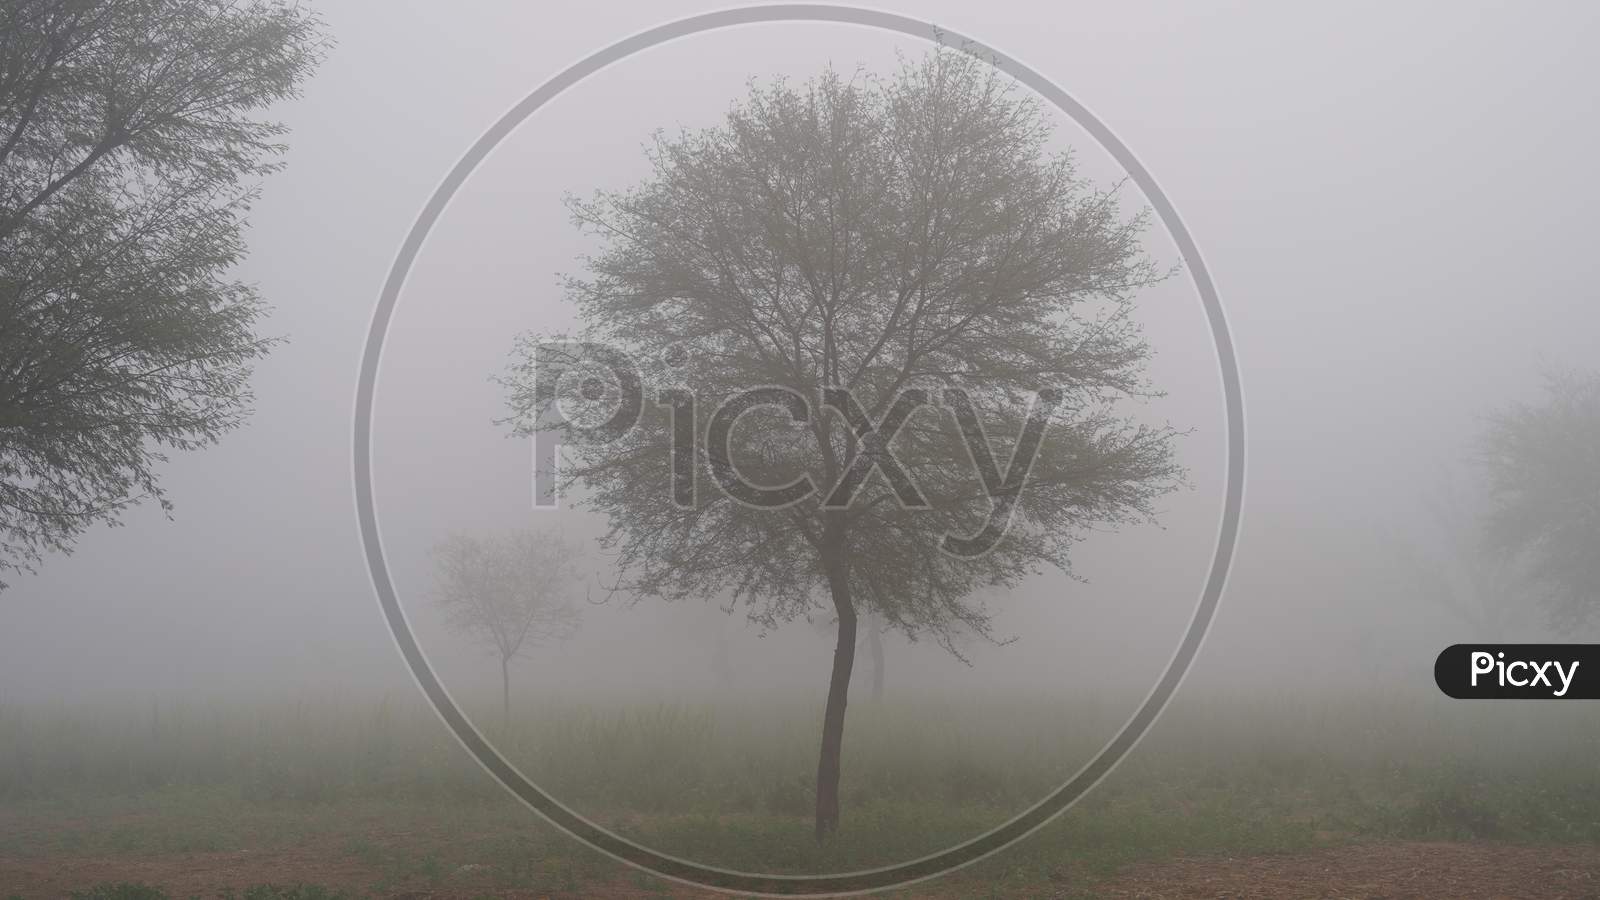 Lonely Tree Of Acacia Or Babool Tree In Heavy Fog And Mist In The Morning Time.